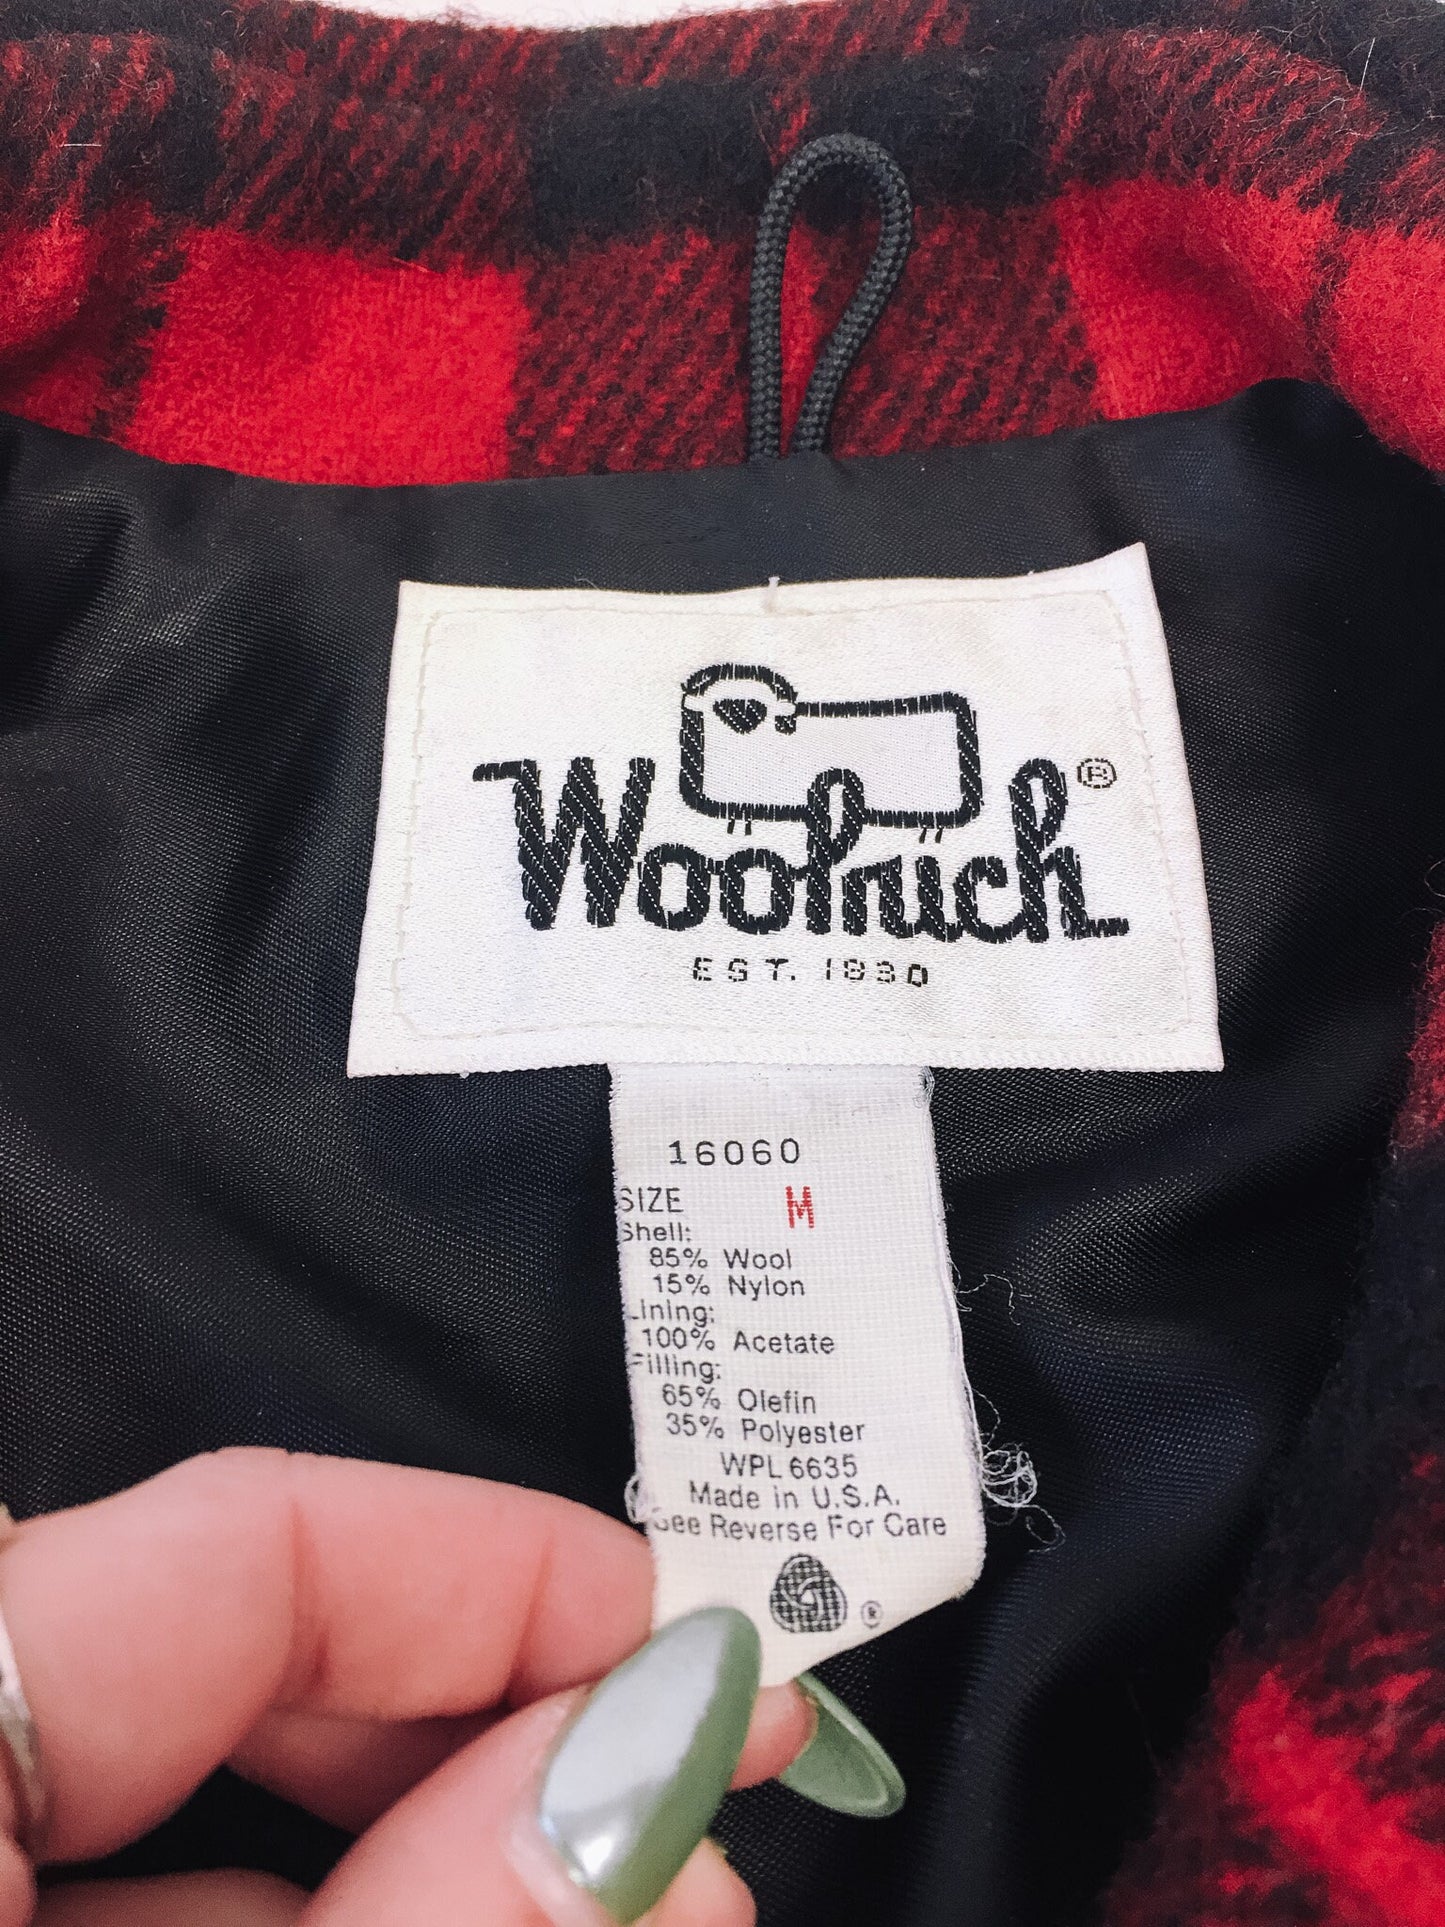 Vintage 70s Woolrich Red Buffalo Plaid Jacket, Sz. M, 1970s Pure Wool Coat